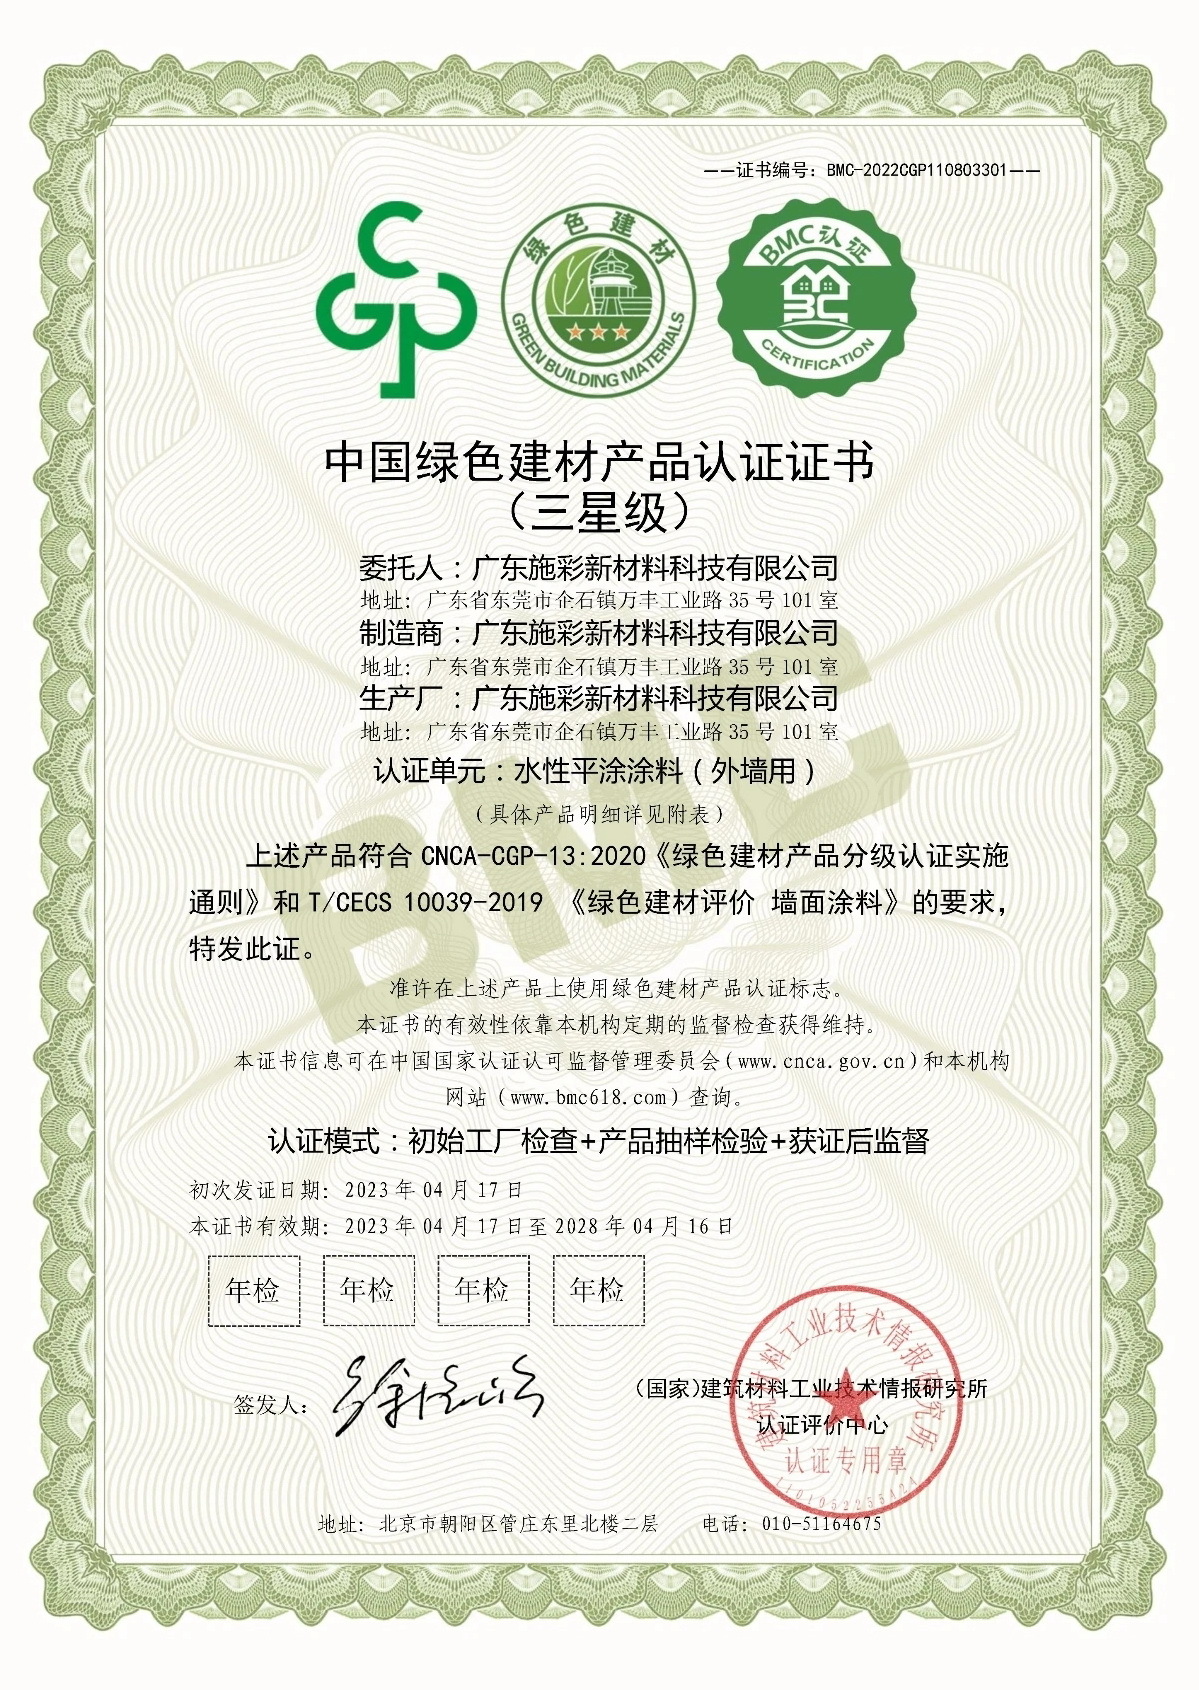 China Green Building Materials Product Certification Certificate-Waterborne flat coating (for exterior walls)